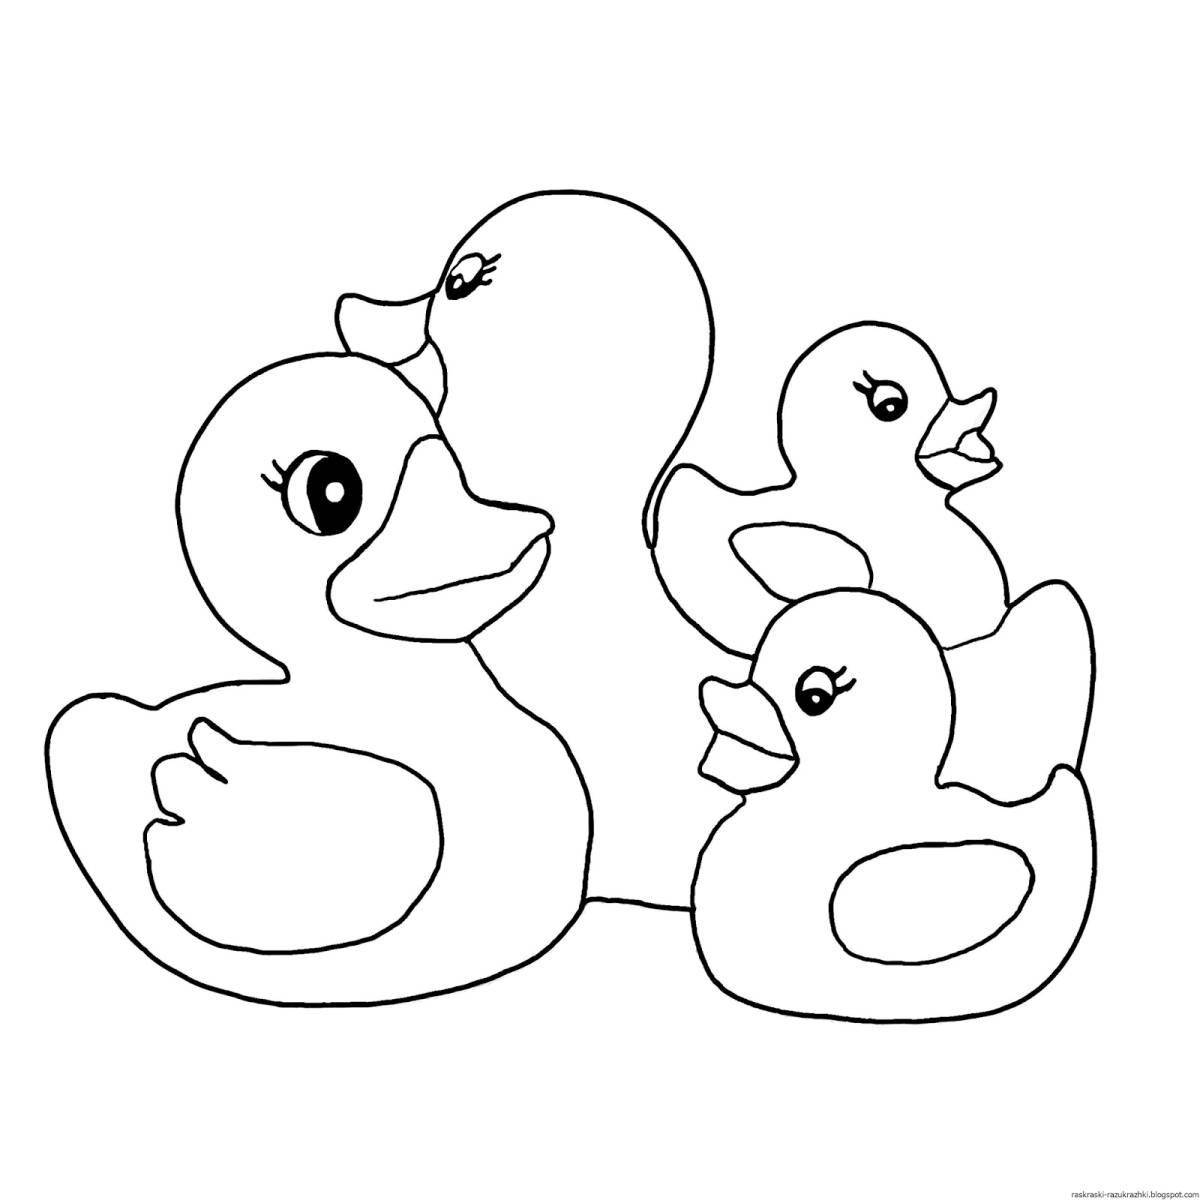 Coloring wild duck and duckling